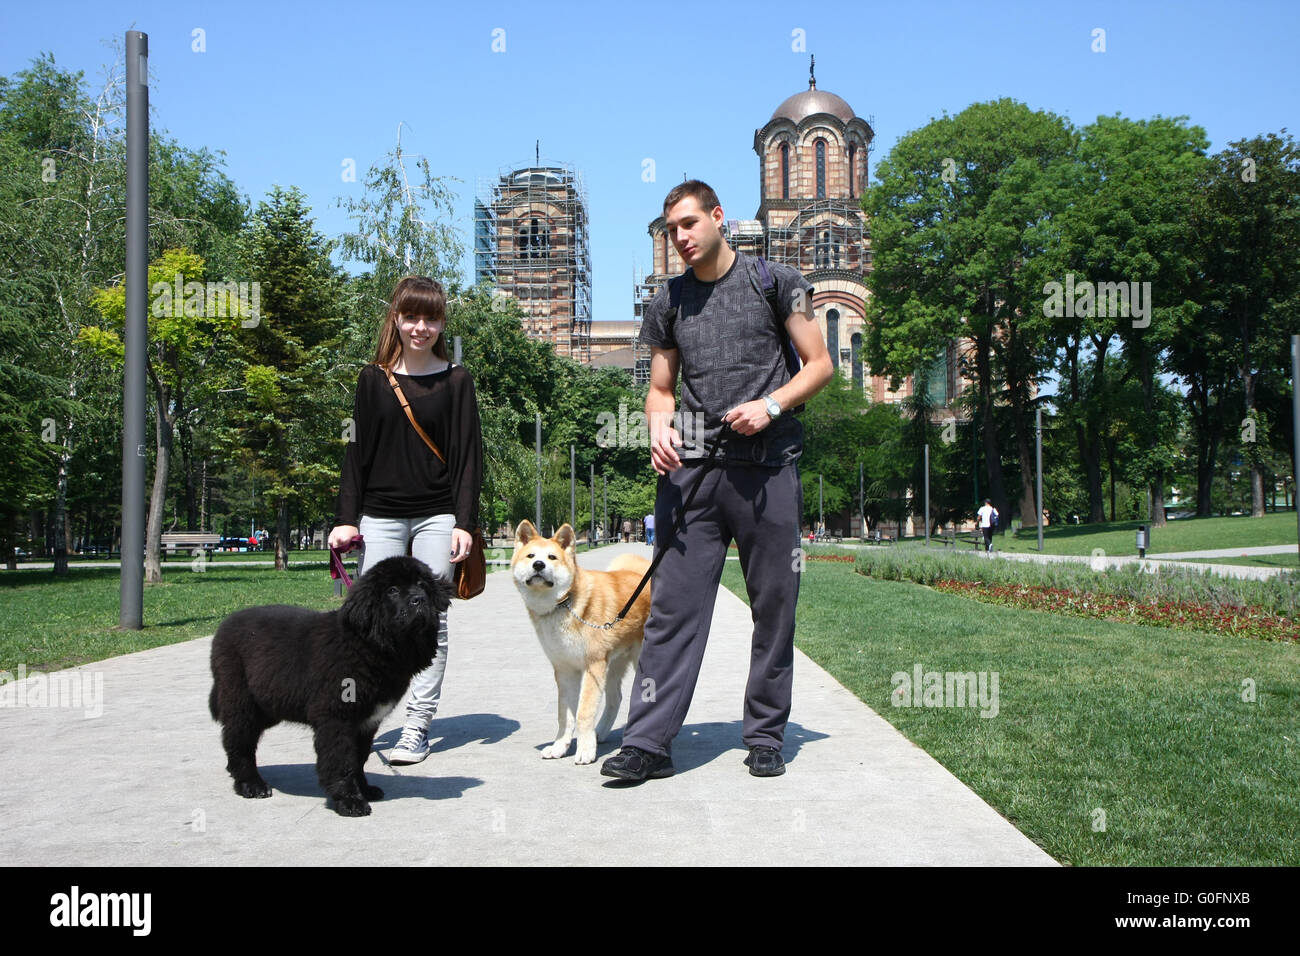 Walking with puppies Stock Photo